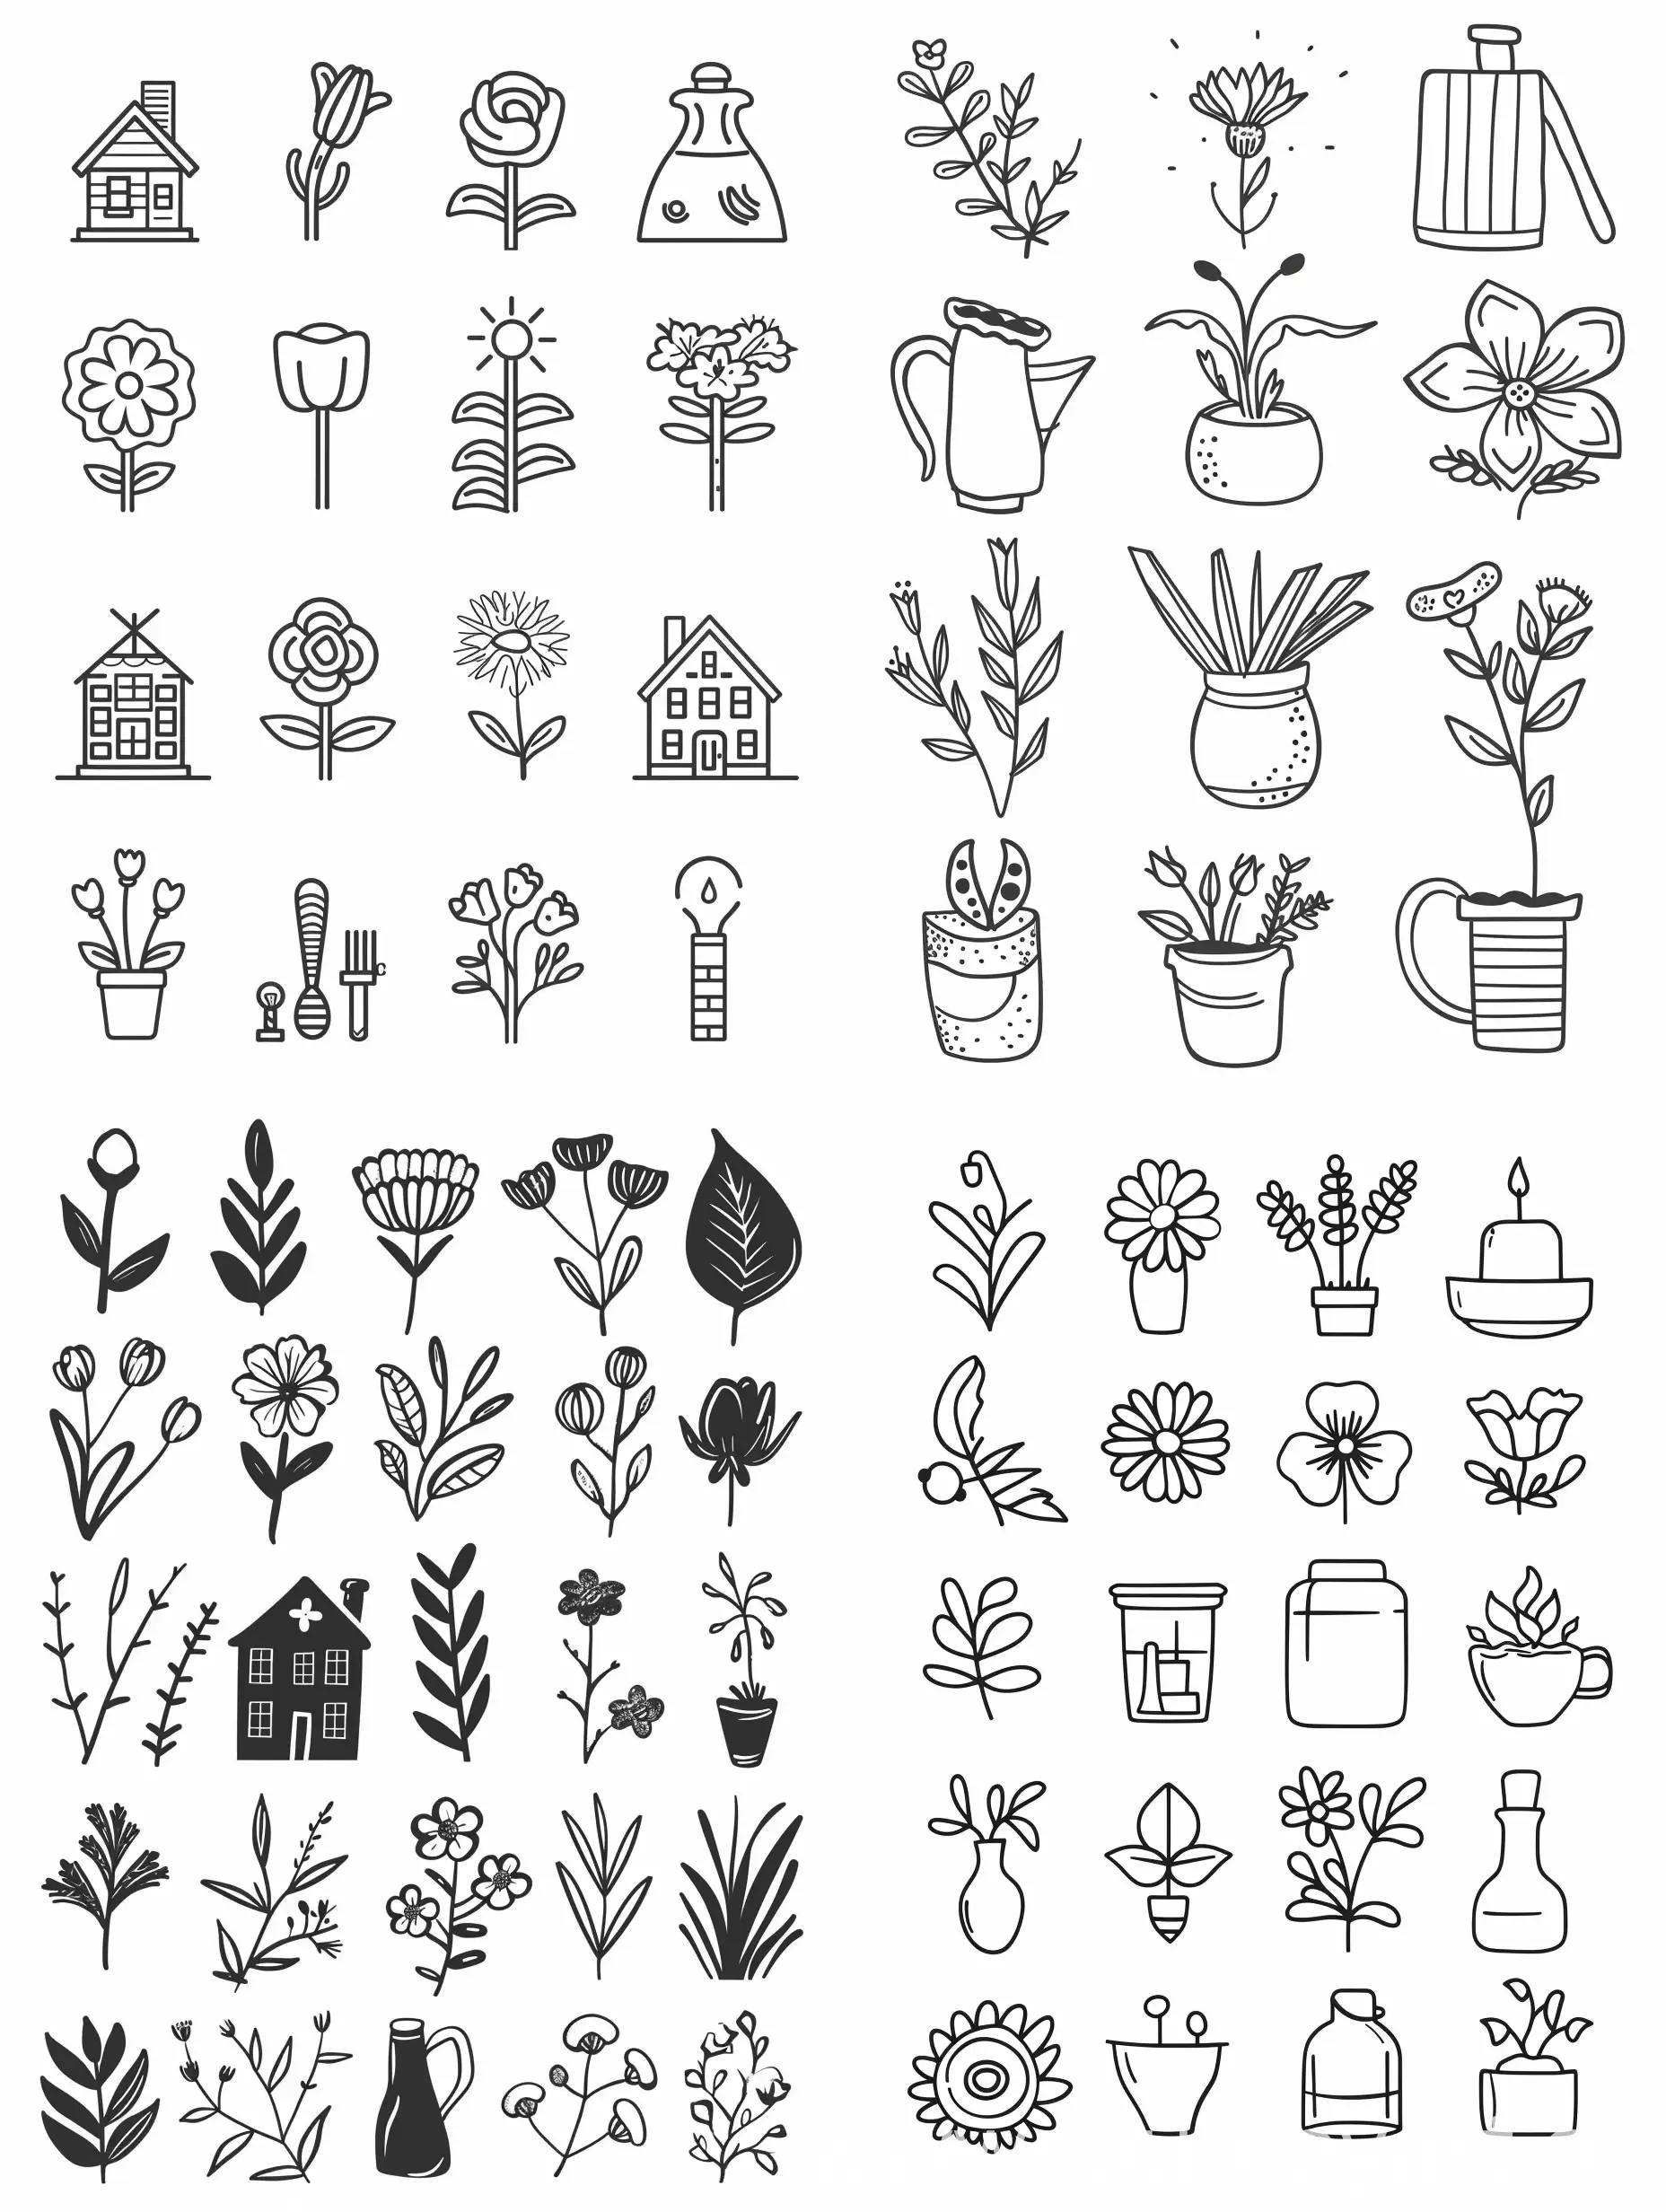 Cozy-HandDrawn-Outline-Icons-NatureInspired-Home-Elegance